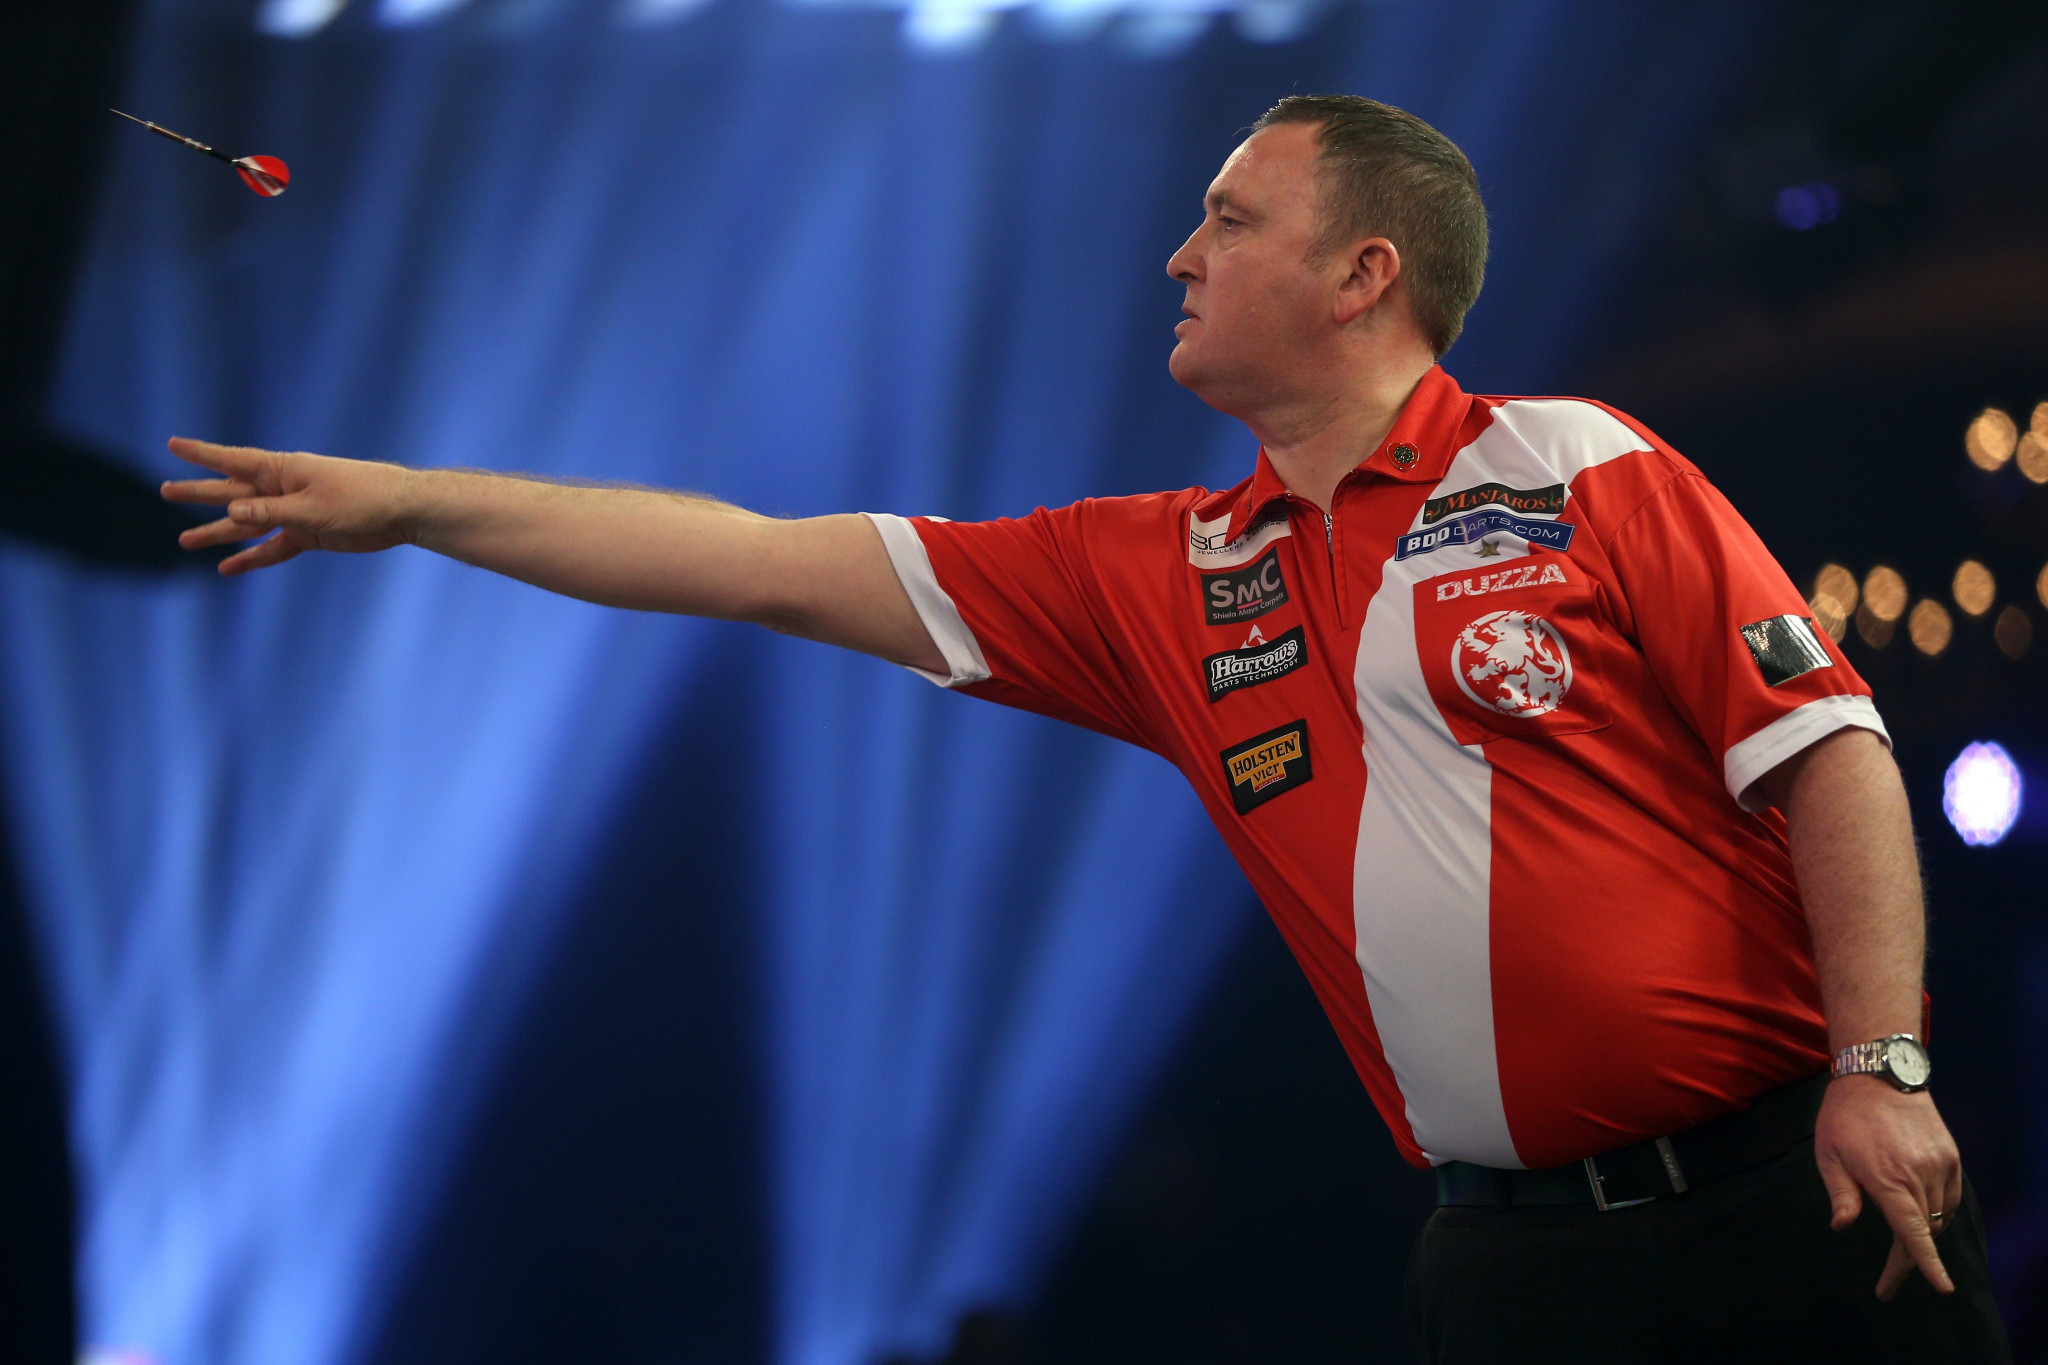 Defending champion Durrant eases into second round of BDO World Championship